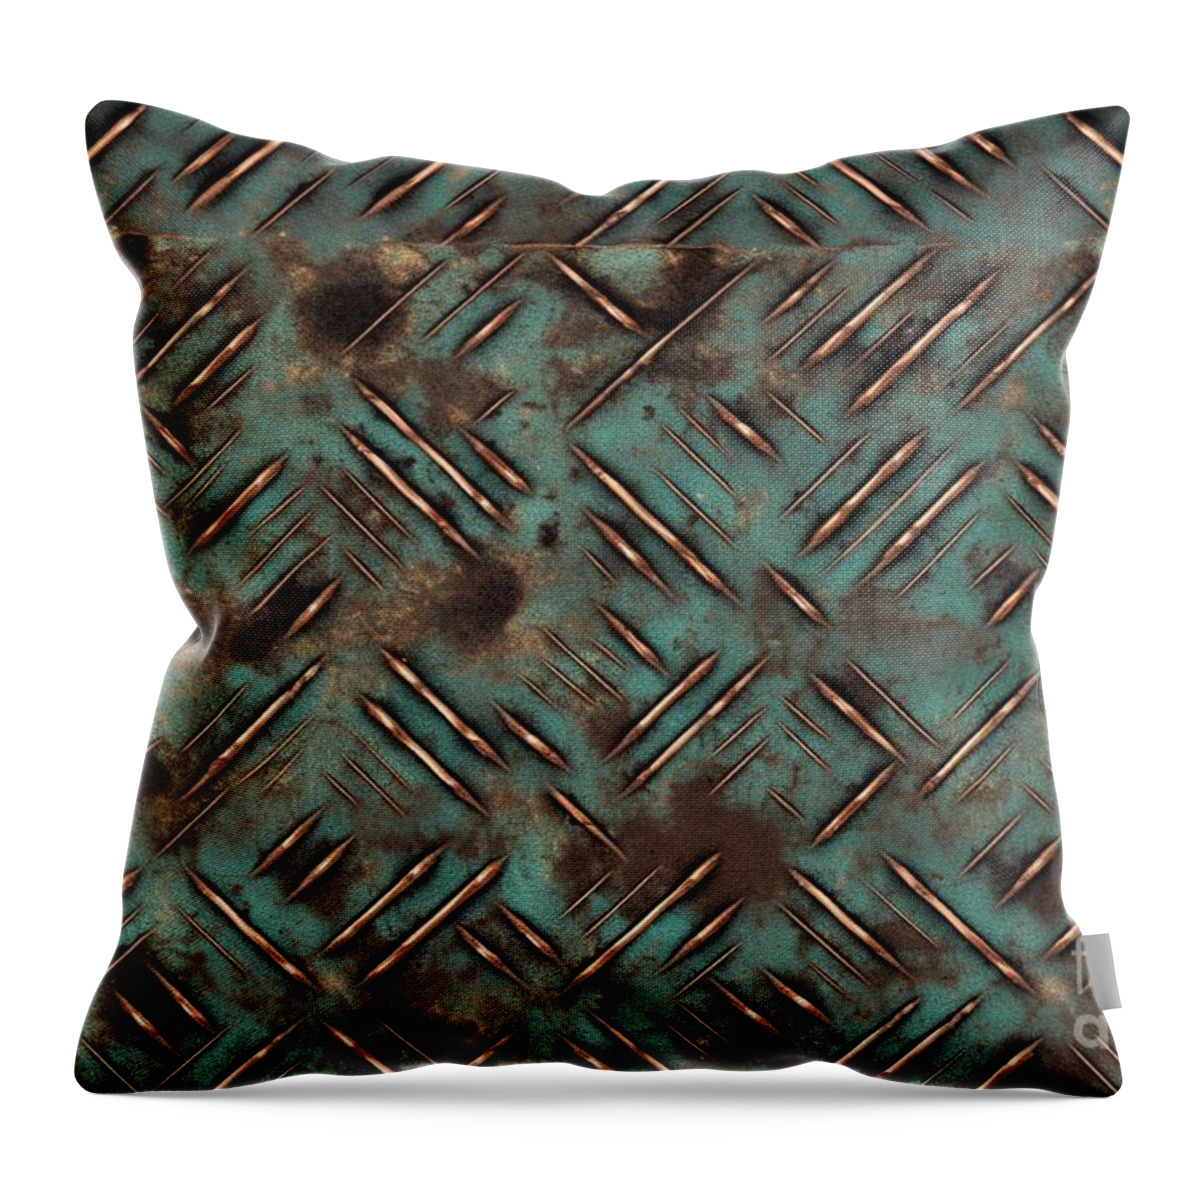 Seamless Throw Pillow featuring the painting Seamless Oxidized Copper Patina Metal Diamond Plate Grunge Background Texture Vintage Antique Weathered Worn Corroded Rusted Bronze Or Brass Abstract Steampunk Pattern High Resolution 3d Rendering #1 by N Akkash